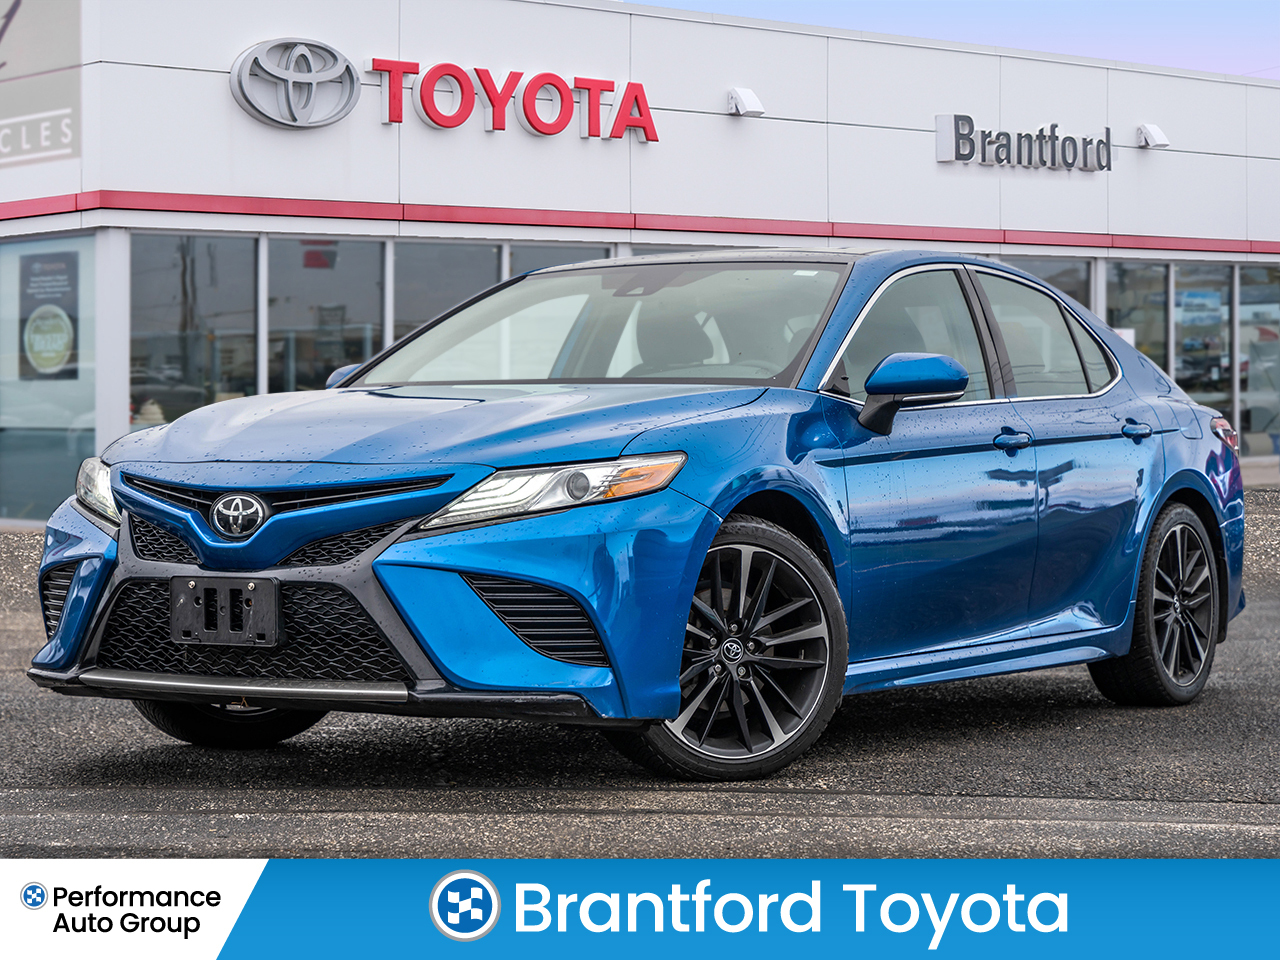 2019 Toyota Camry XSE- 4cylinder - front wheel drive - new Michelins